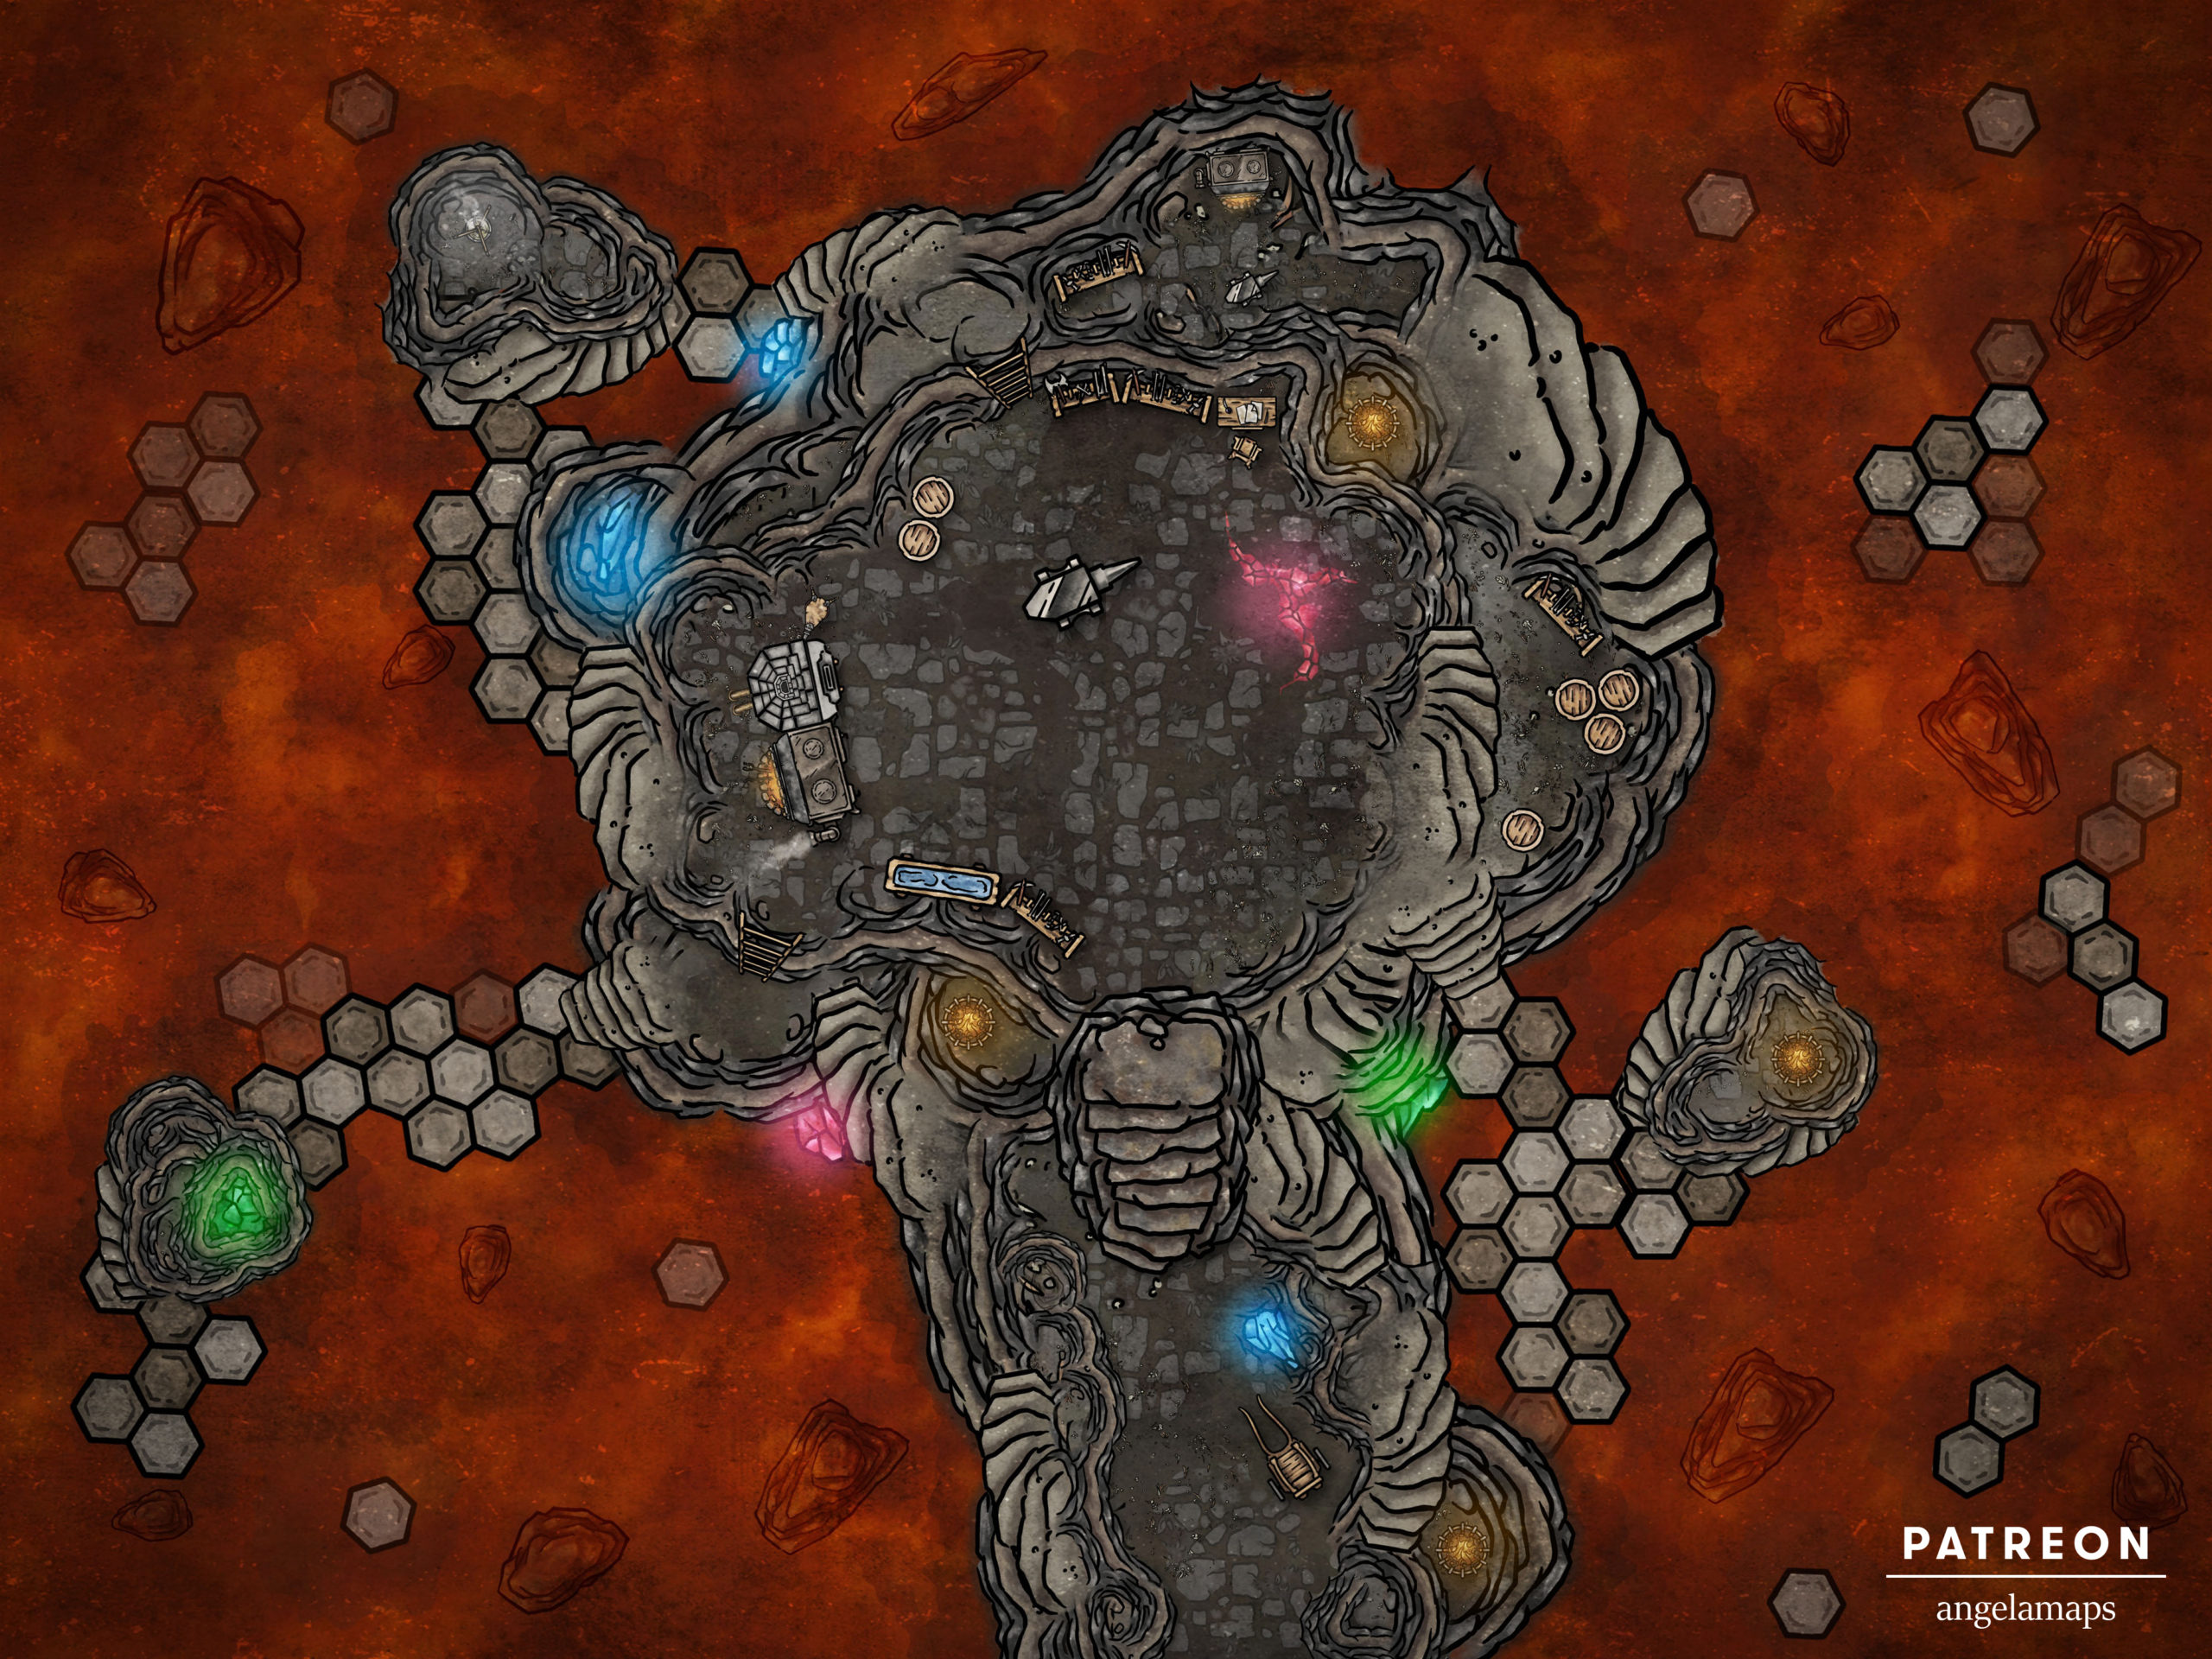 Magical forge D&D battle map with support for FVTT and FGU